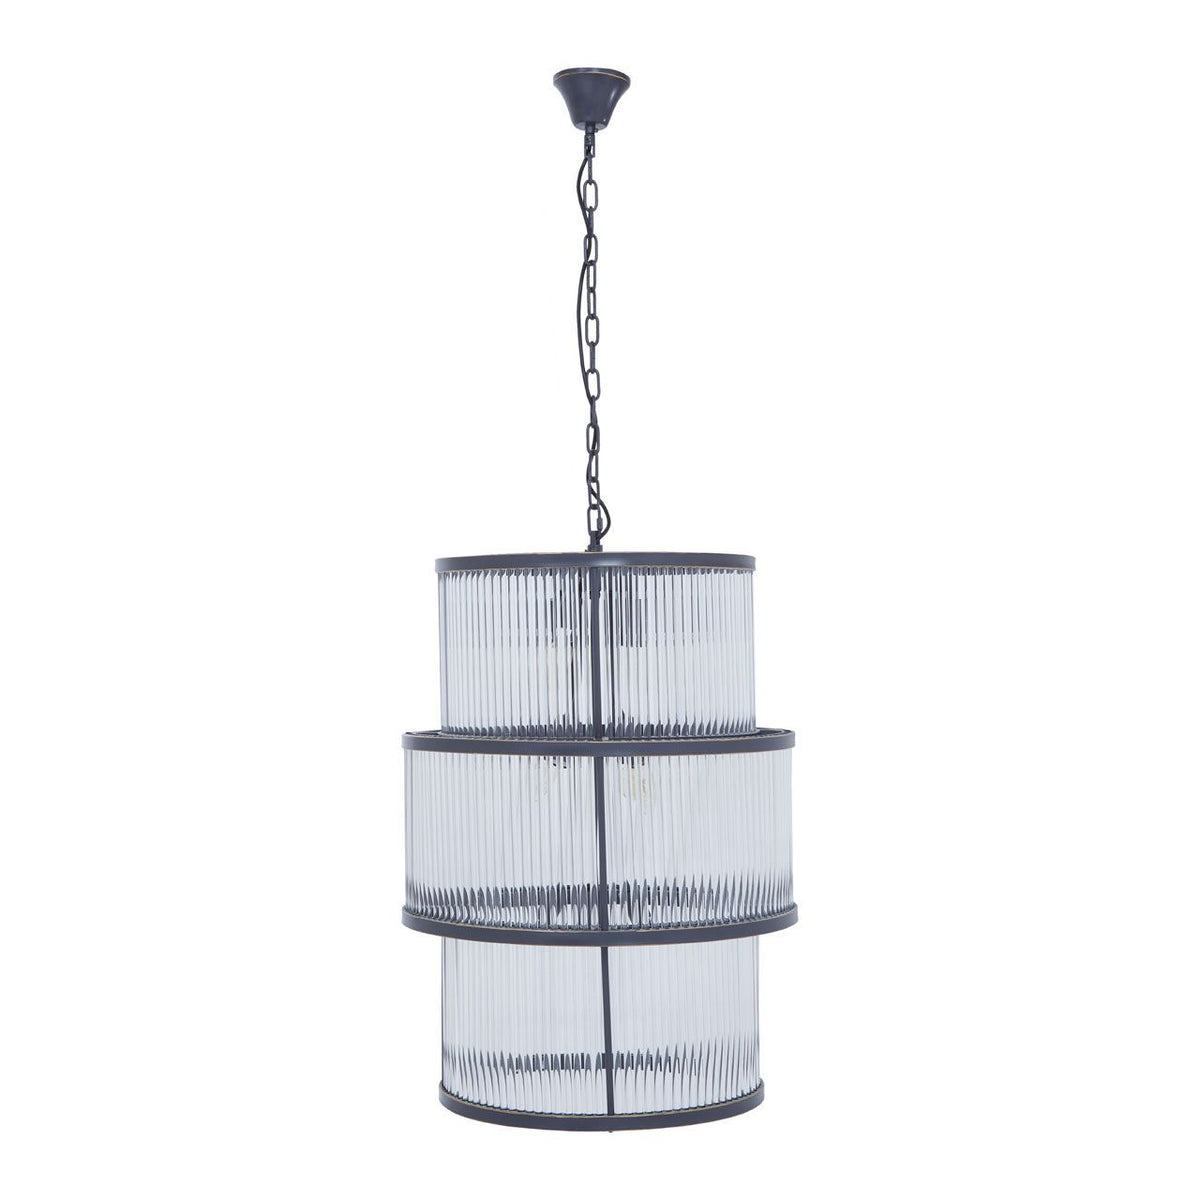 Salasco 3 Tier Chandelier Black With Glass Finish